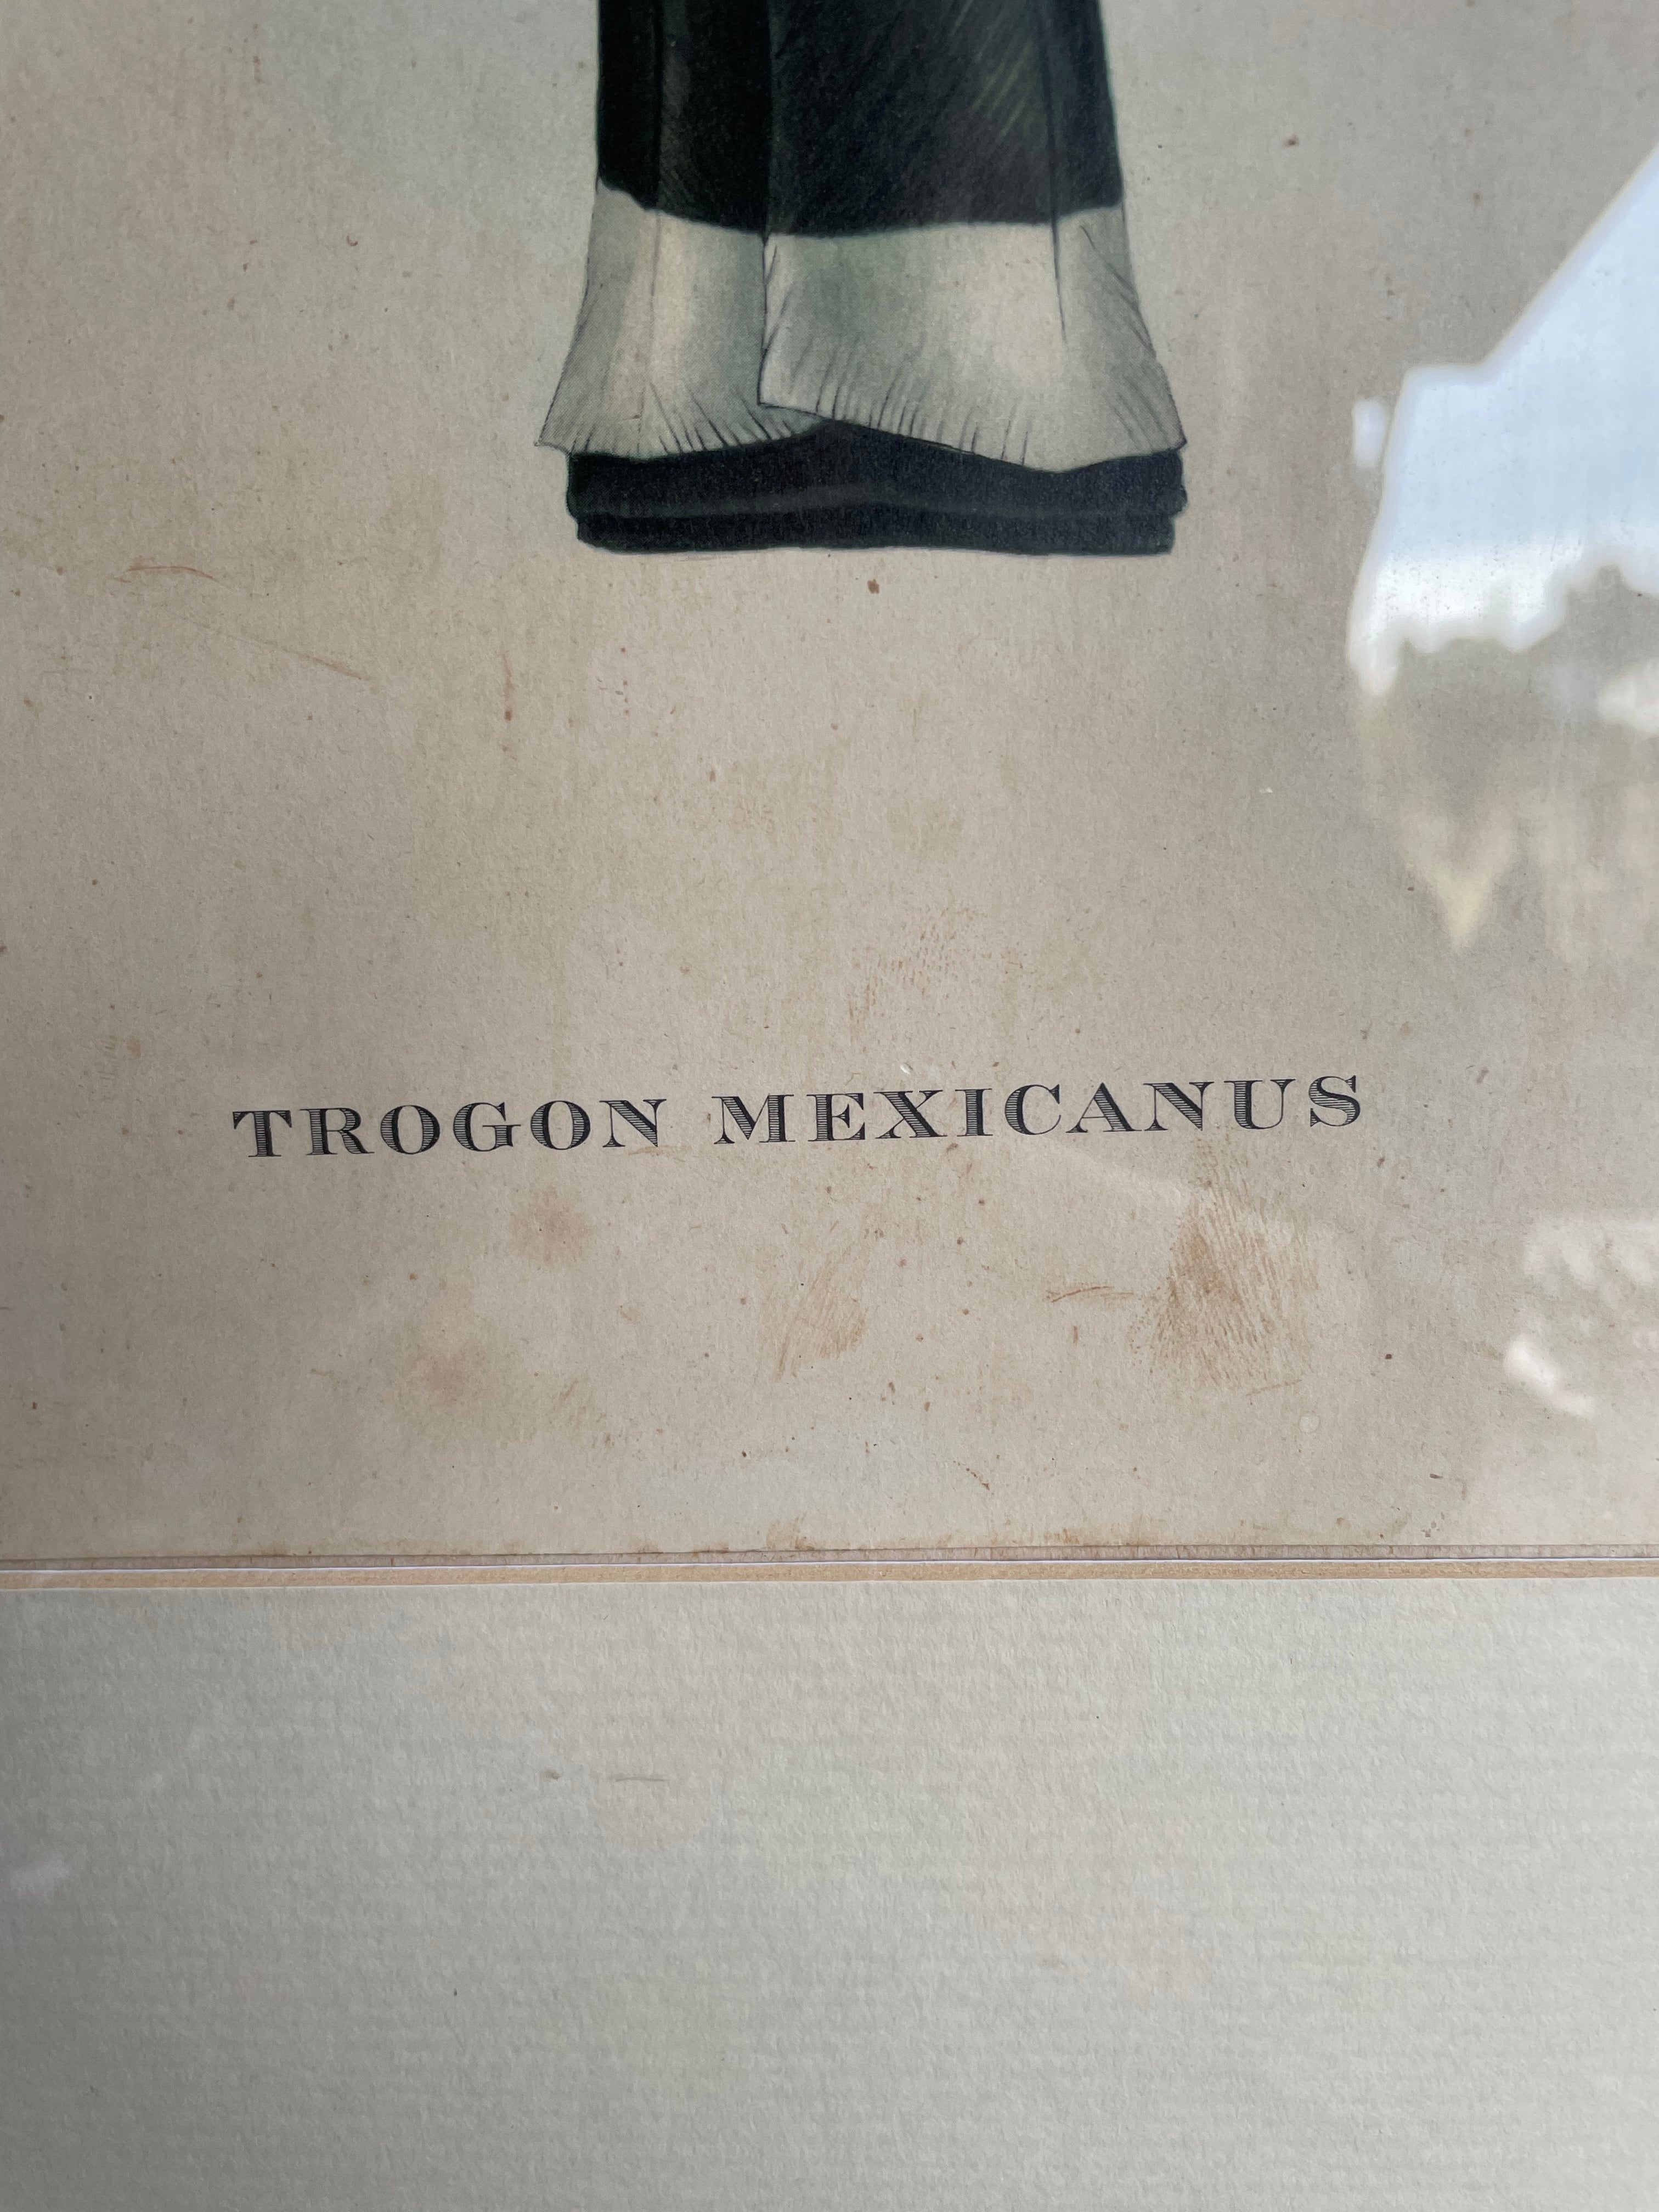 Large Framed Antique Print of the Mexican Trogan